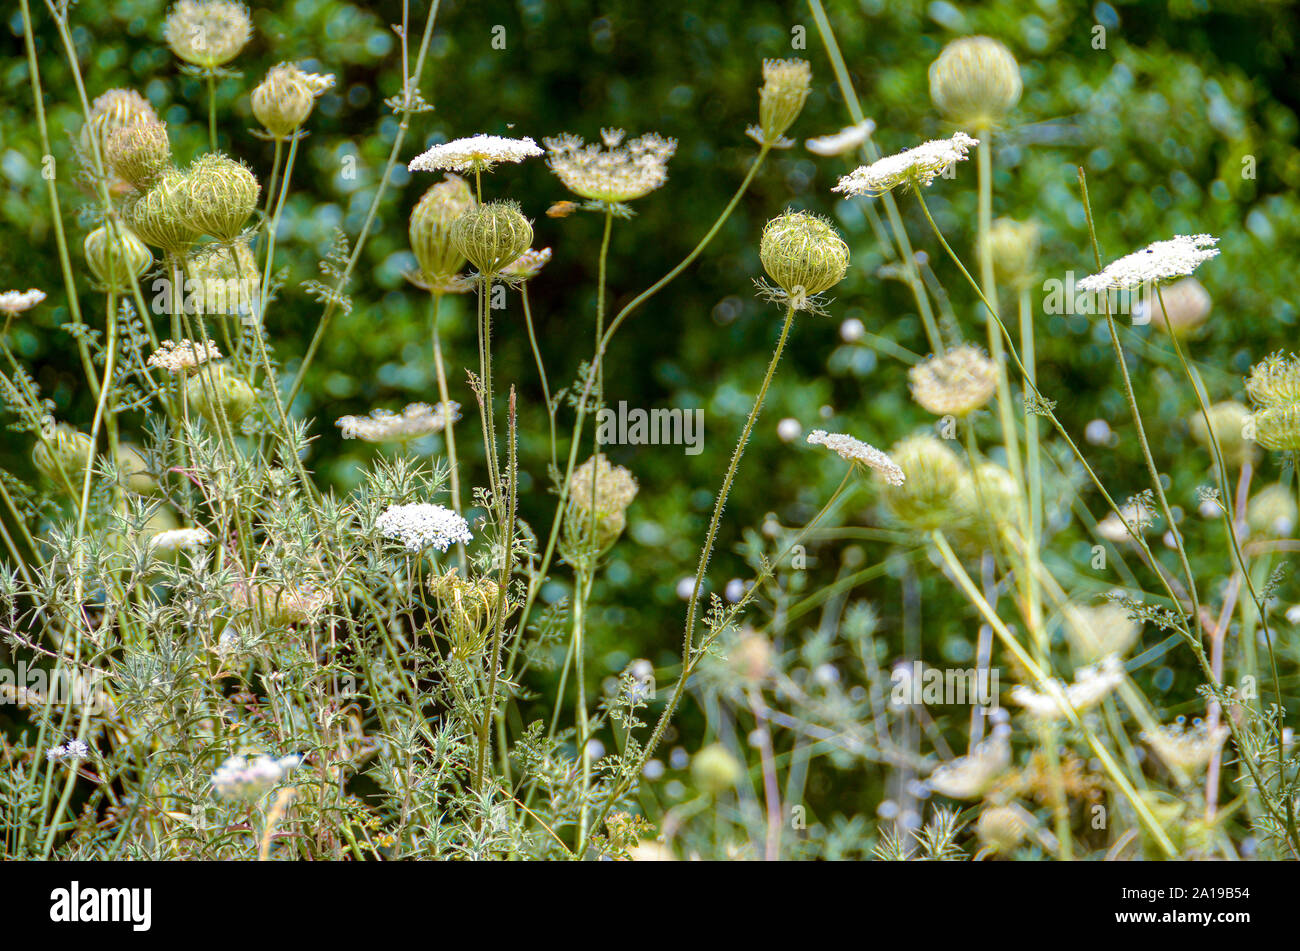 Daucus carota (common names include wild carrot, bird's nest, bishop's lace, and Queen Anne's lace). Photographed in June in the Carmel Mountain, Isra Stock Photo